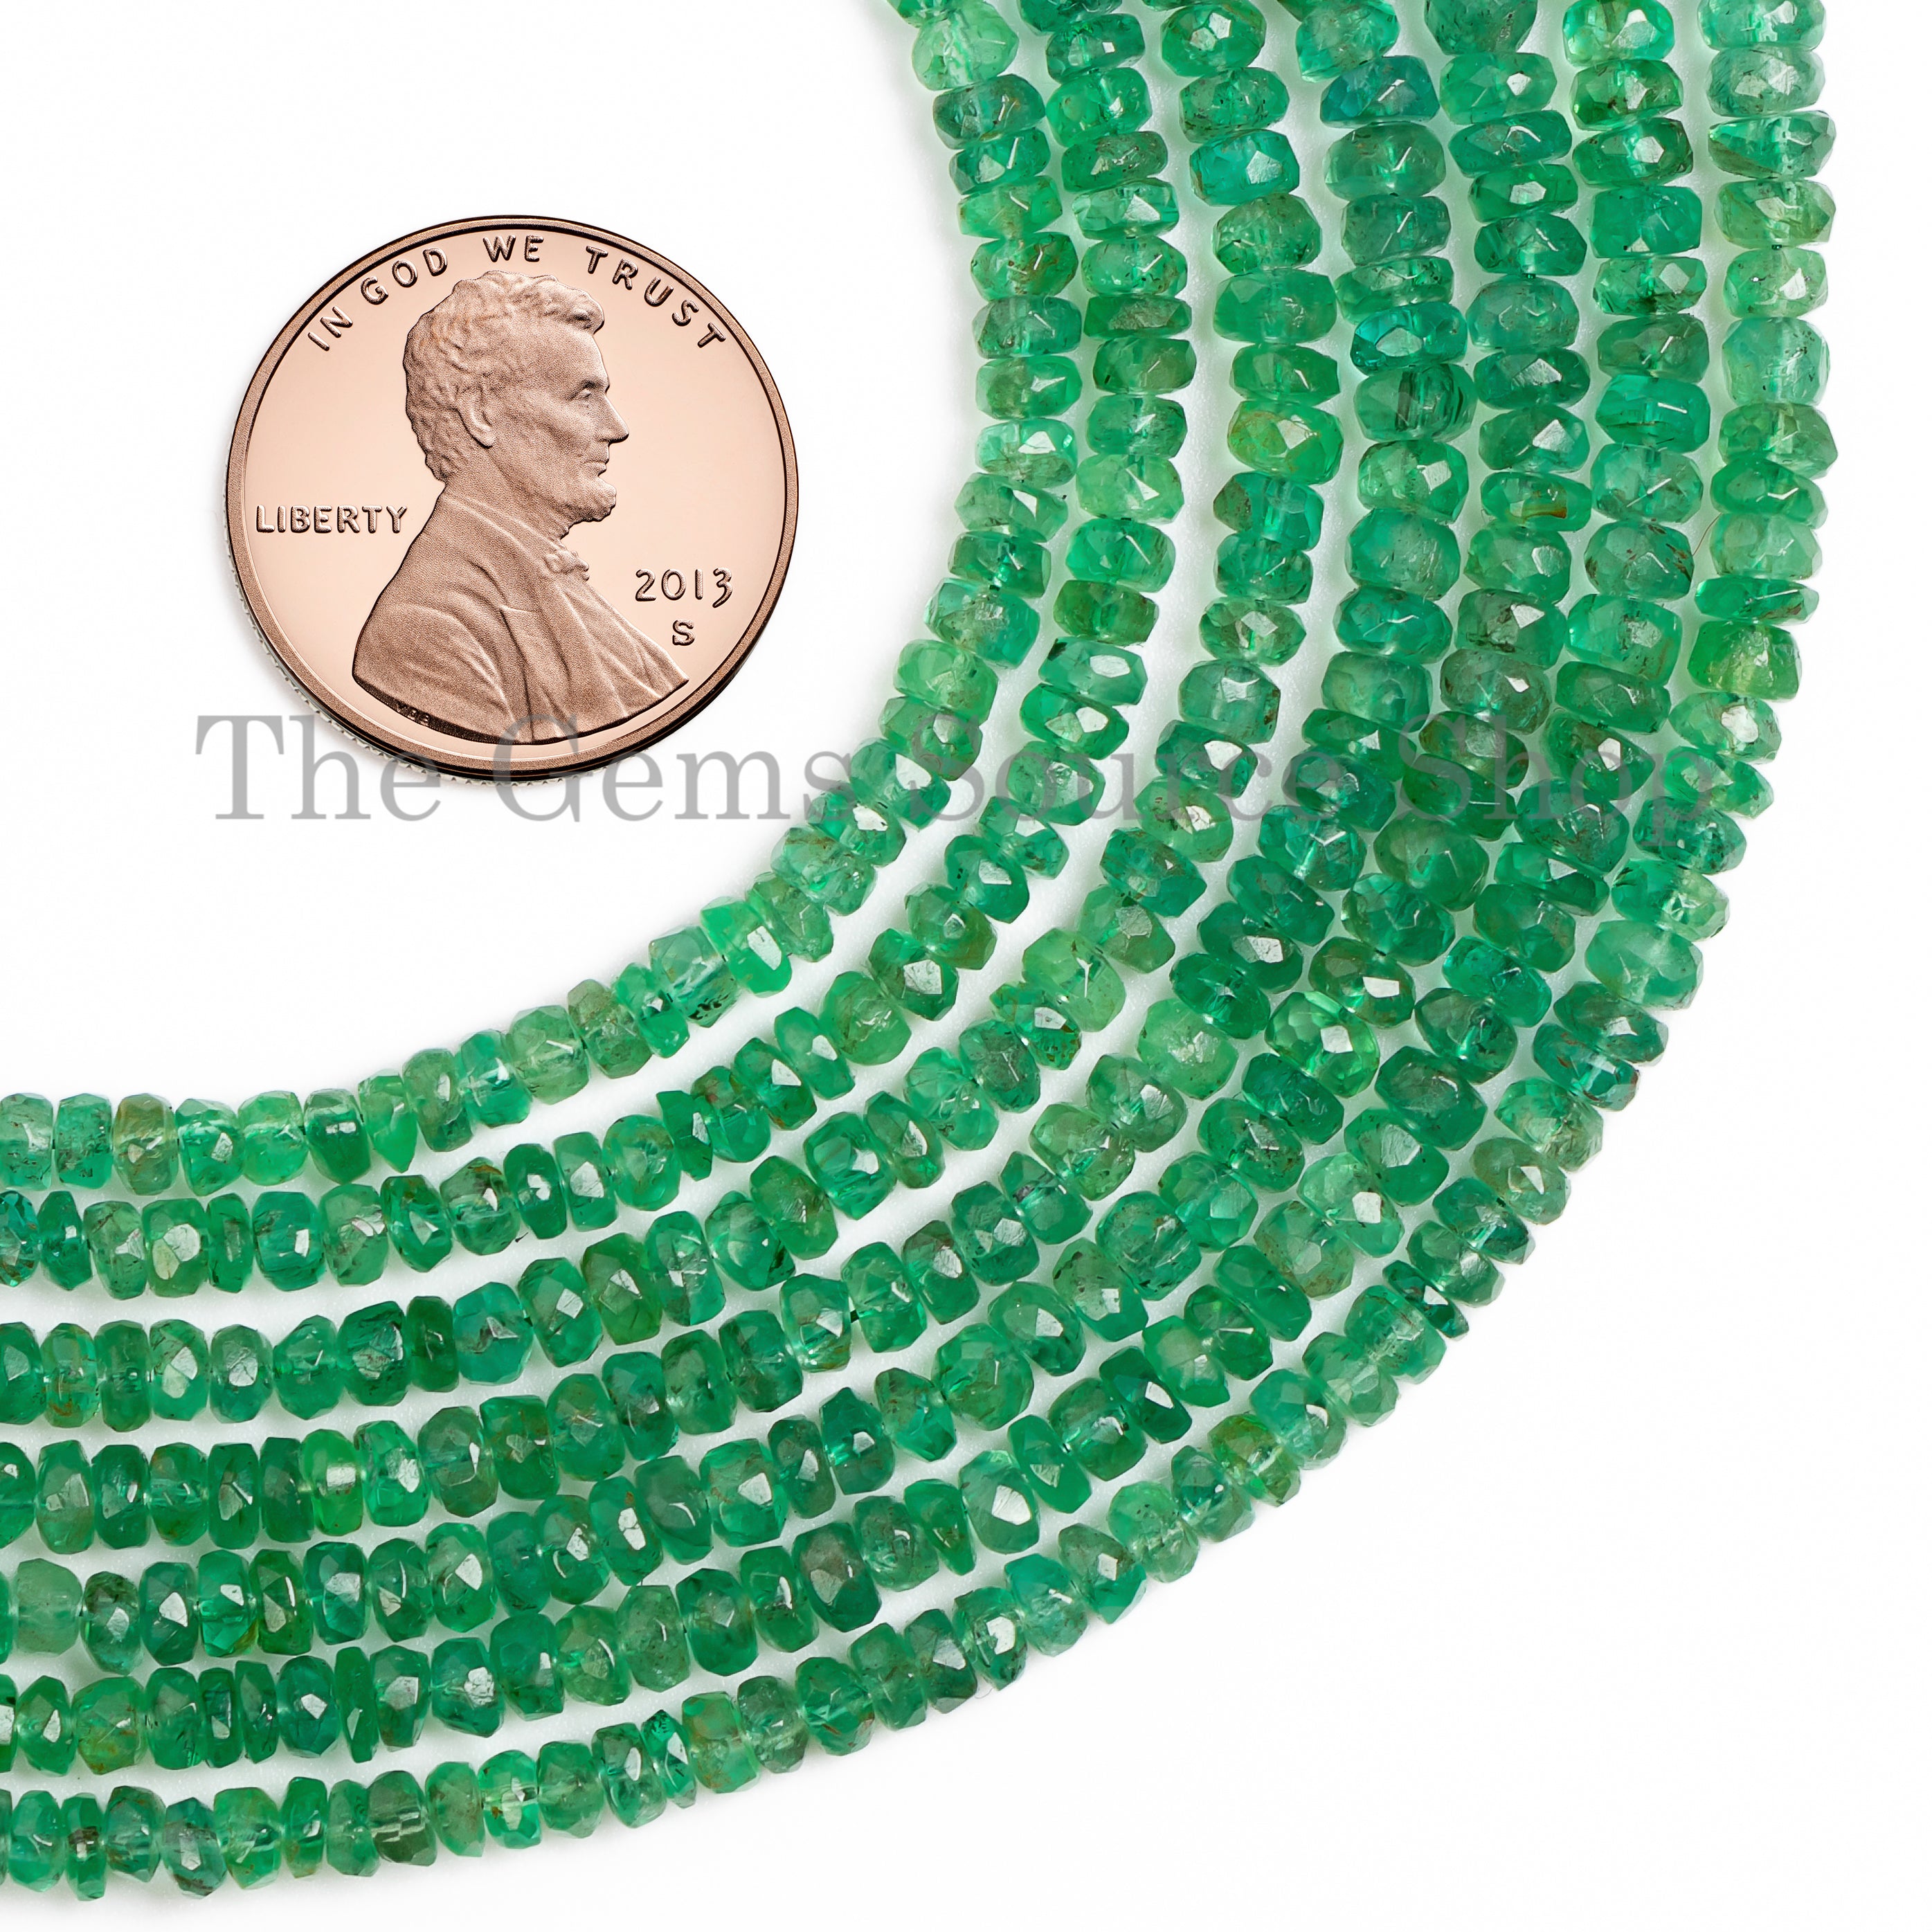 3-4.5 mm Rare Emerald Faceted Rondelle Beads For Jewelry Making TGS-5015